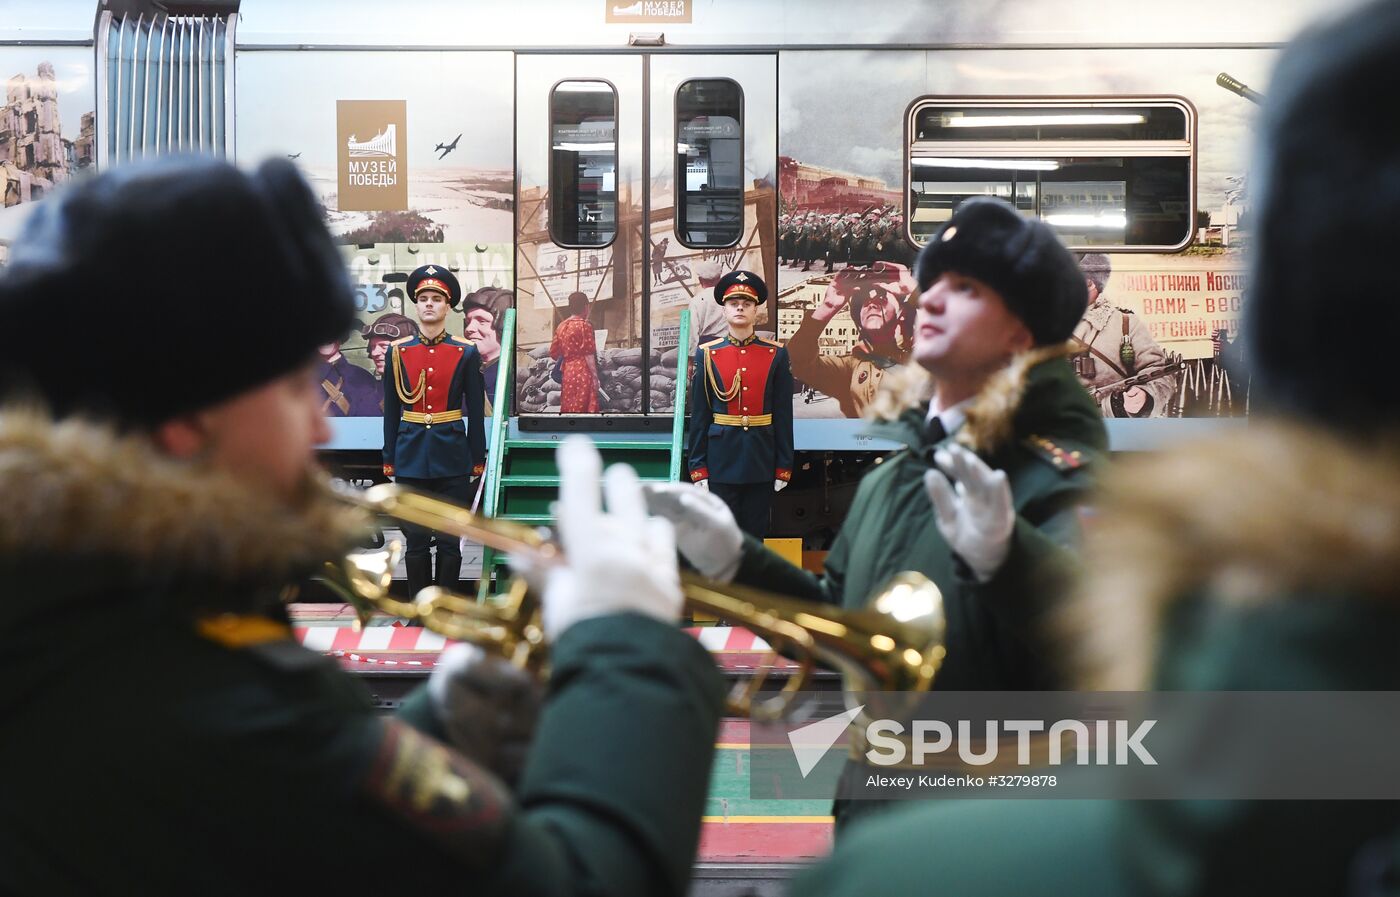 Moscow Metro launches Territory of Victory train